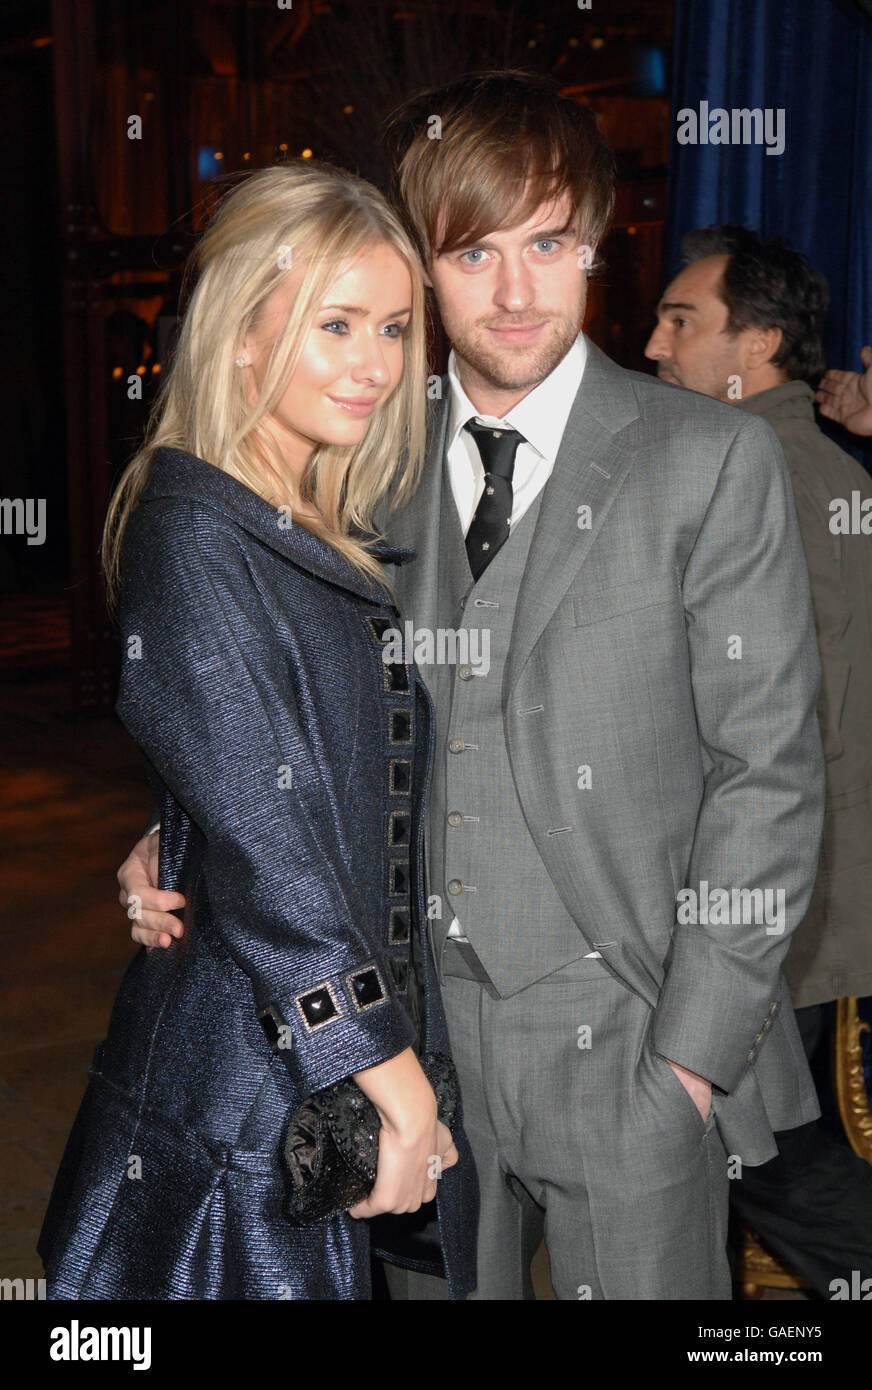 Jonas Armstrong and Sammy Winward at the Golden Compass World Premiere